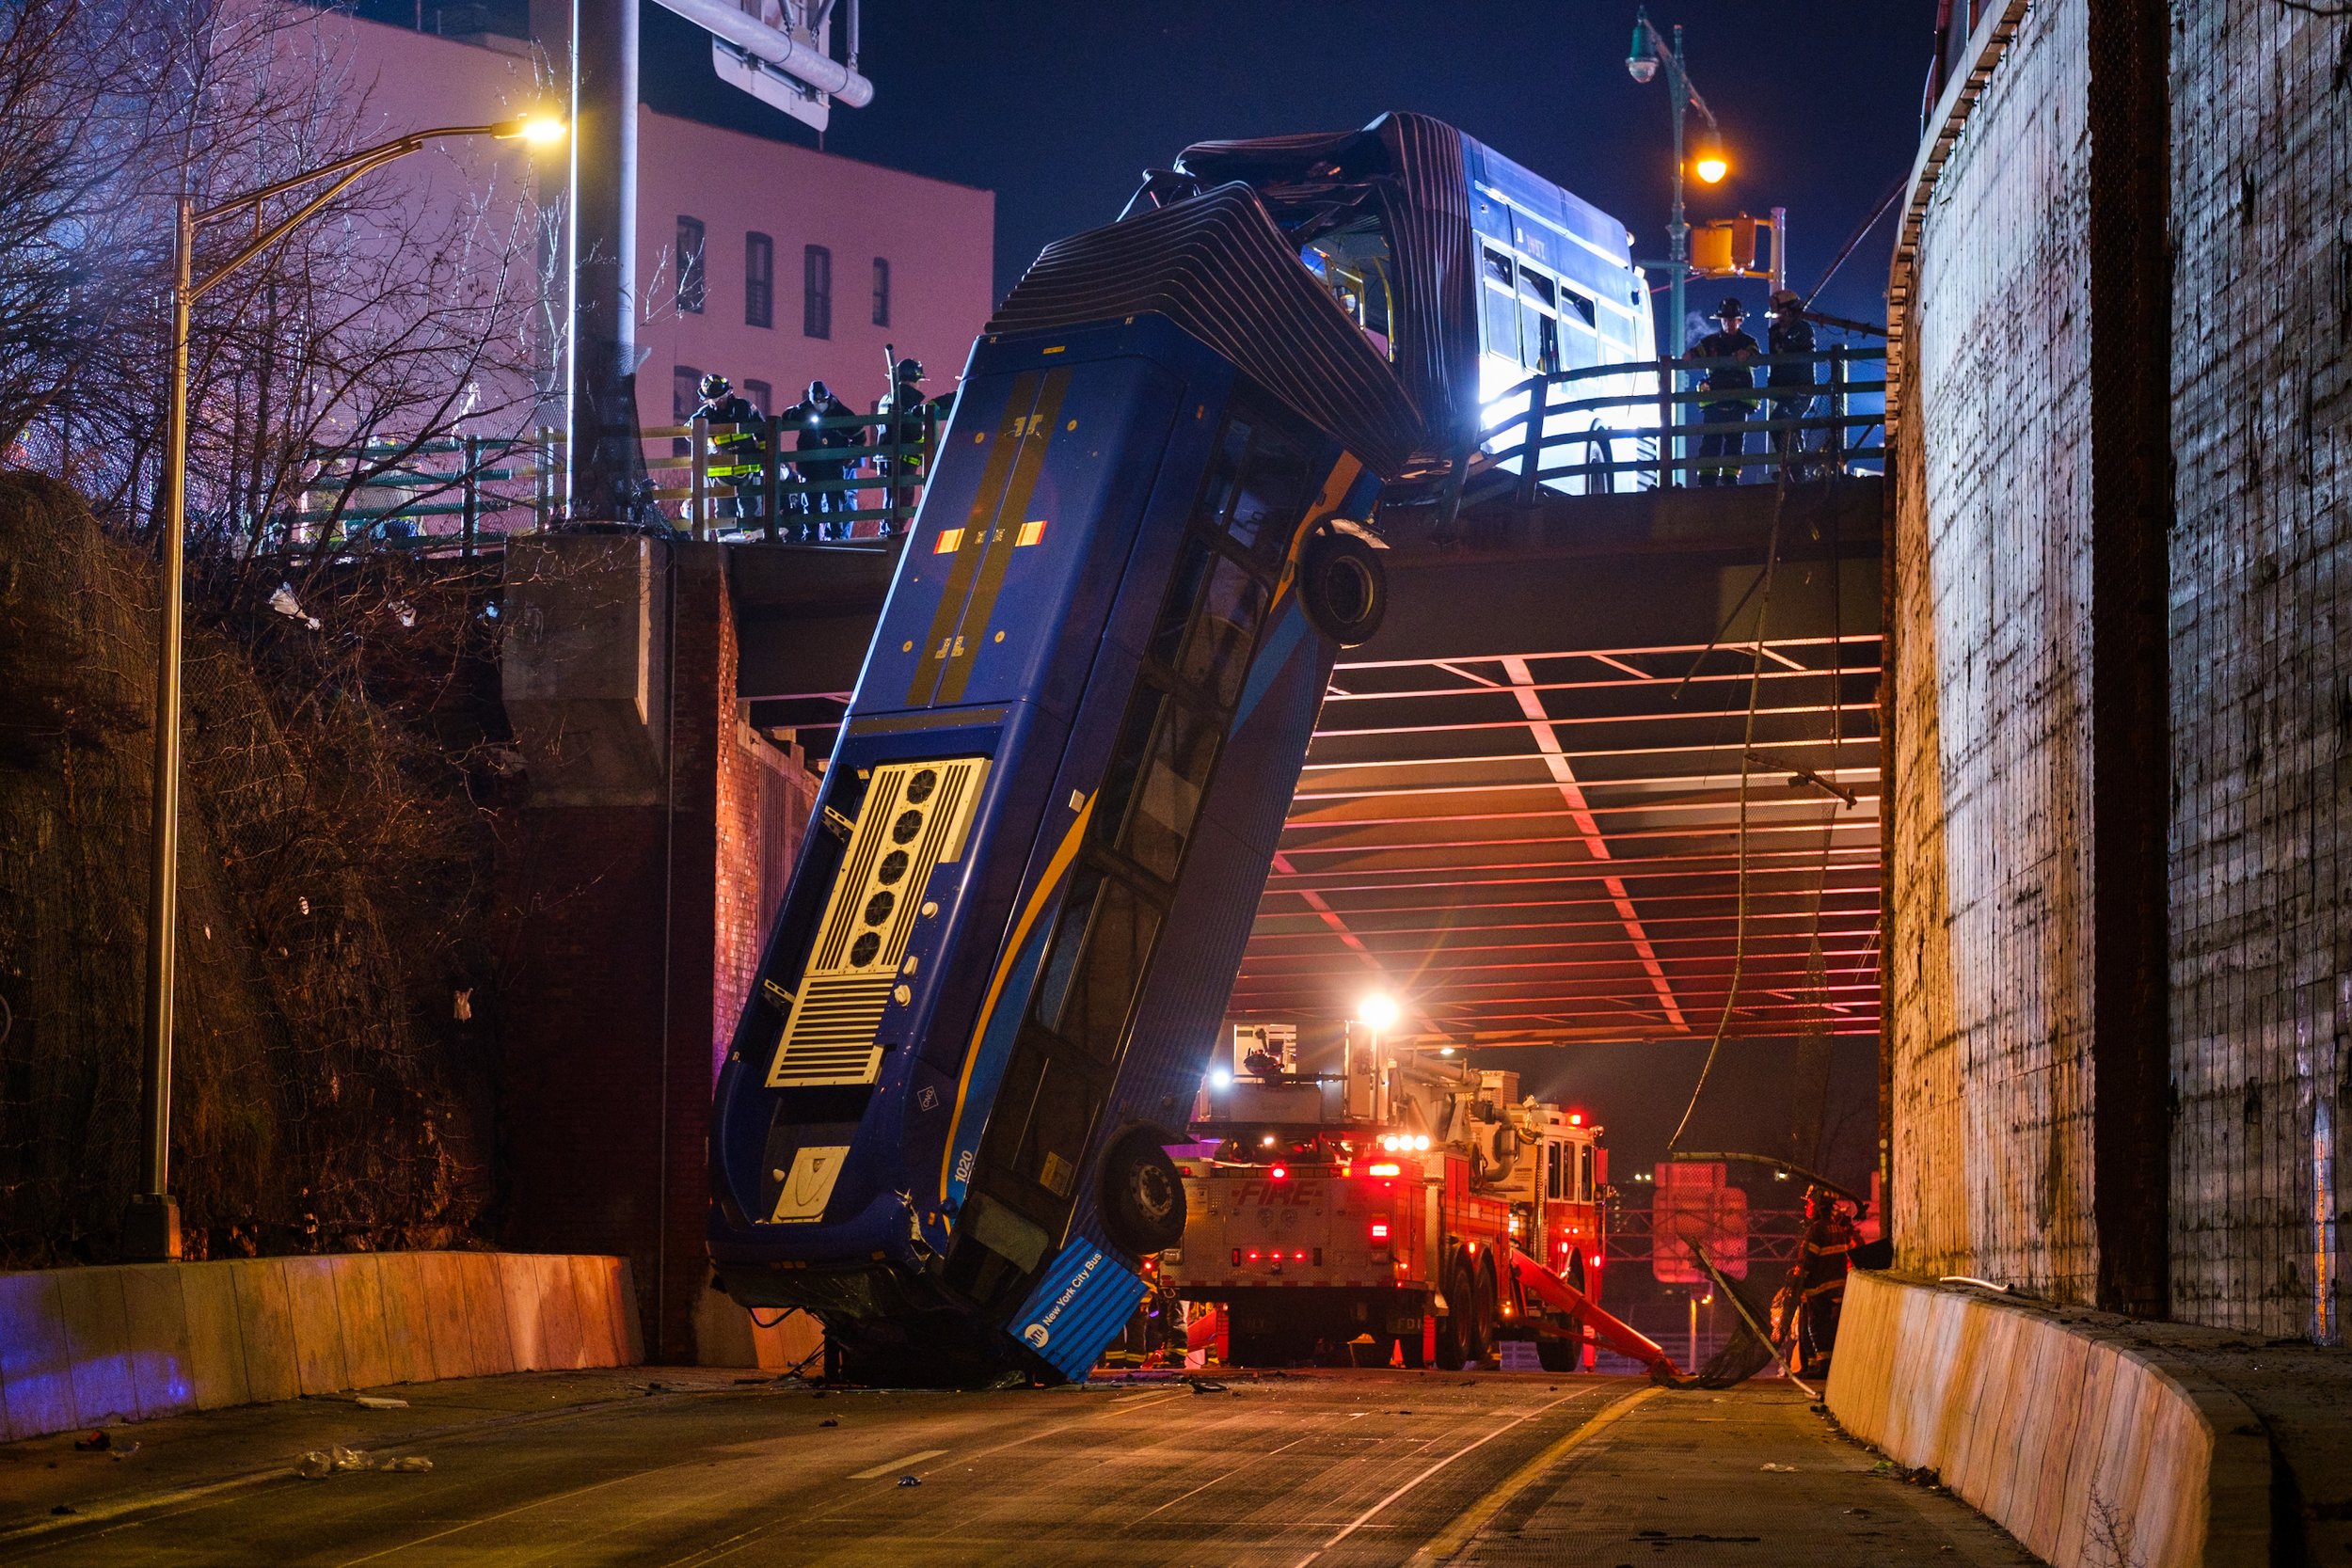  January 15th, 2021 - Bronx, NY: An MTA articulated bus split itself nearly in half after it veered off the University Ave. overpass when it overshot the ramp onto the Washington Bridge to Manhattan, most likely due to speed, and left seven people in